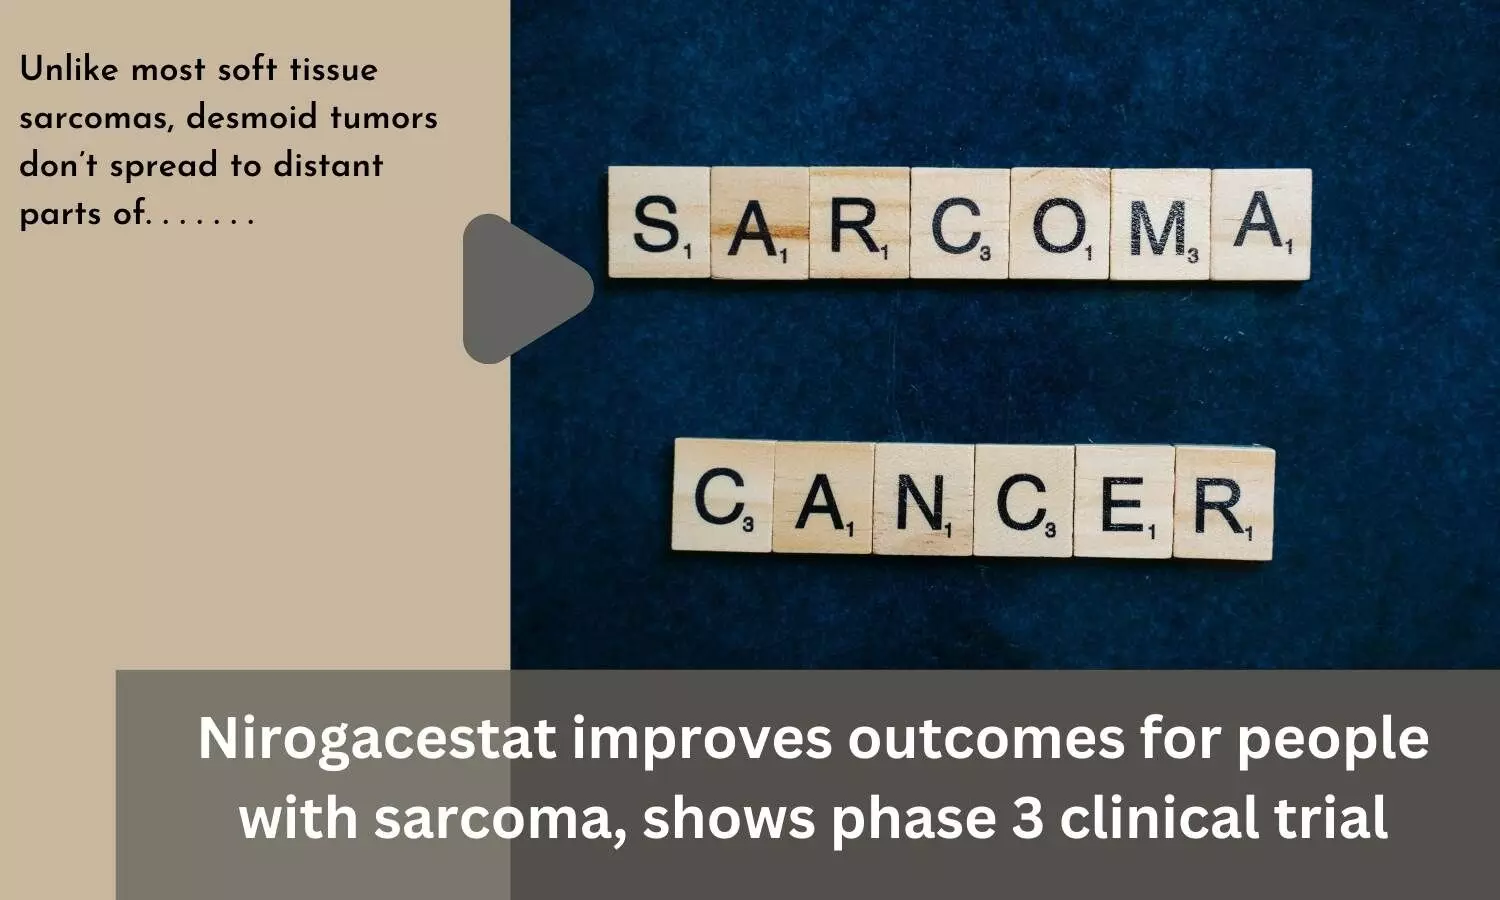 Nirogacestat improves outcomes for people with sarcoma, shows phase 3 clinical trial